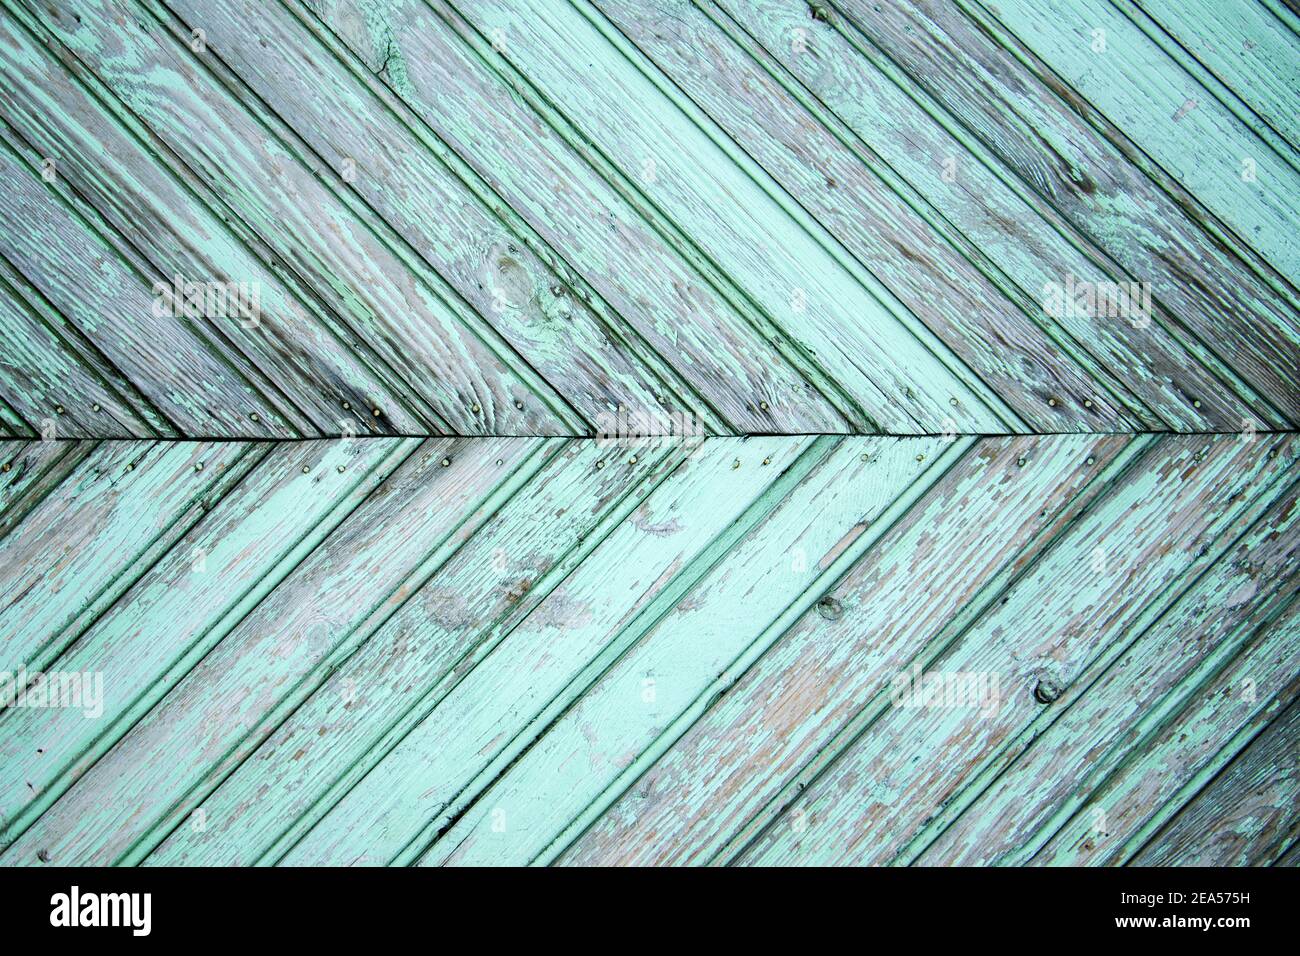 A top view of old floor parquets - cool for wallpaper or background Stock Photo